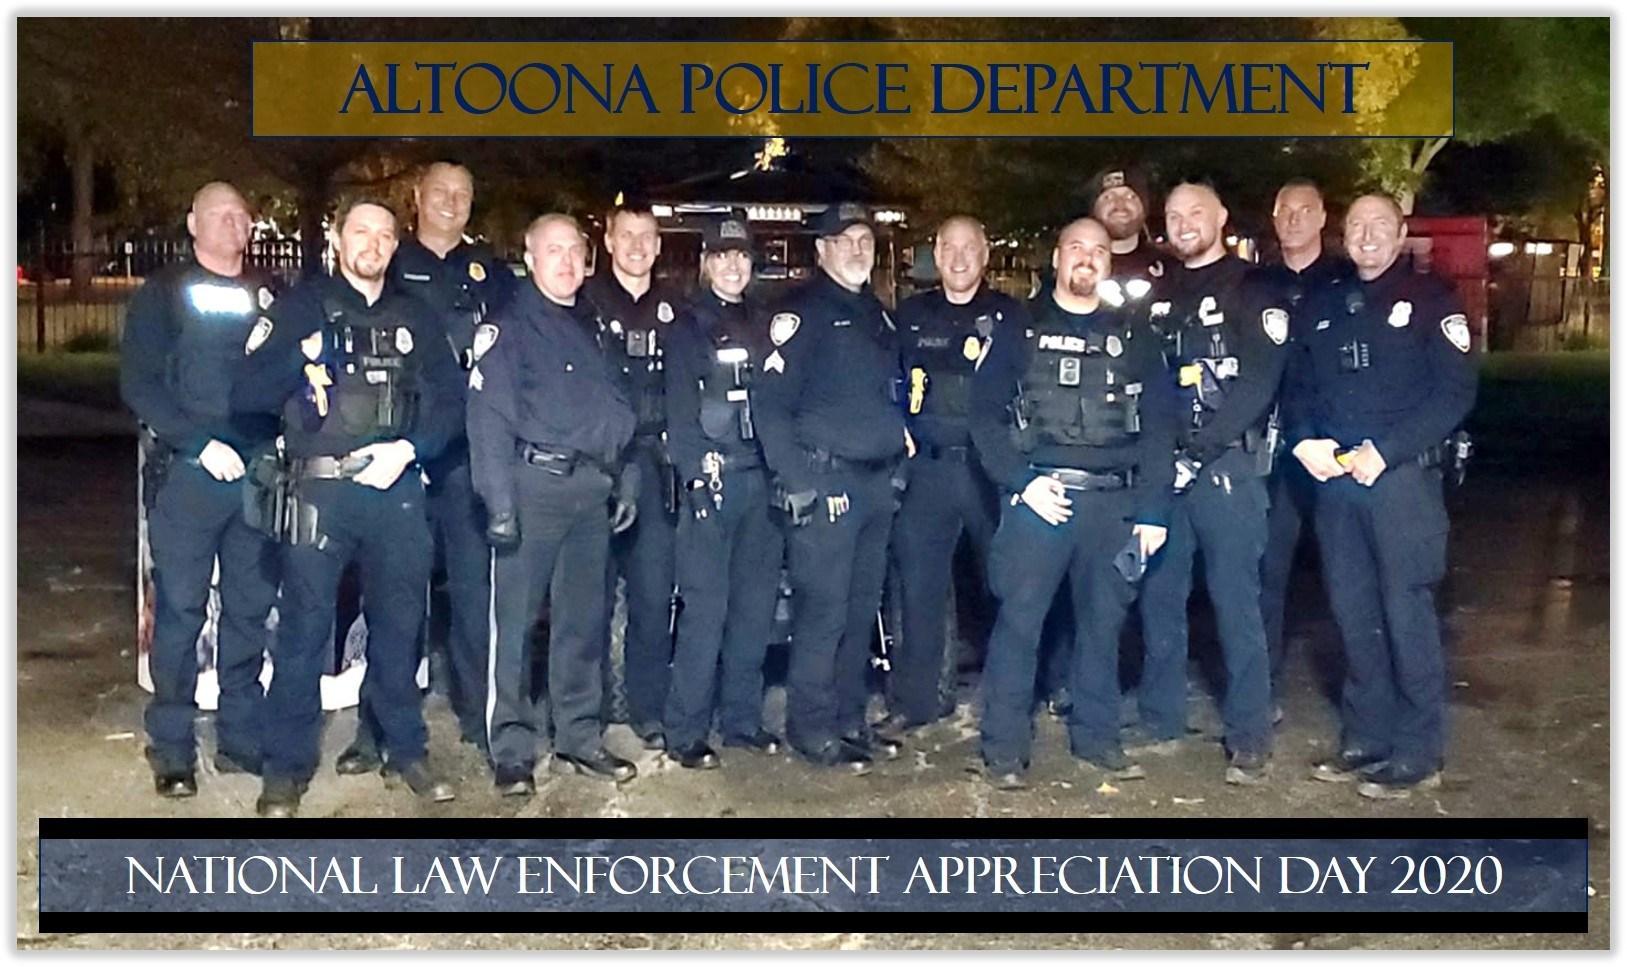 Thursday is National Law Enforcement Appreciation Day